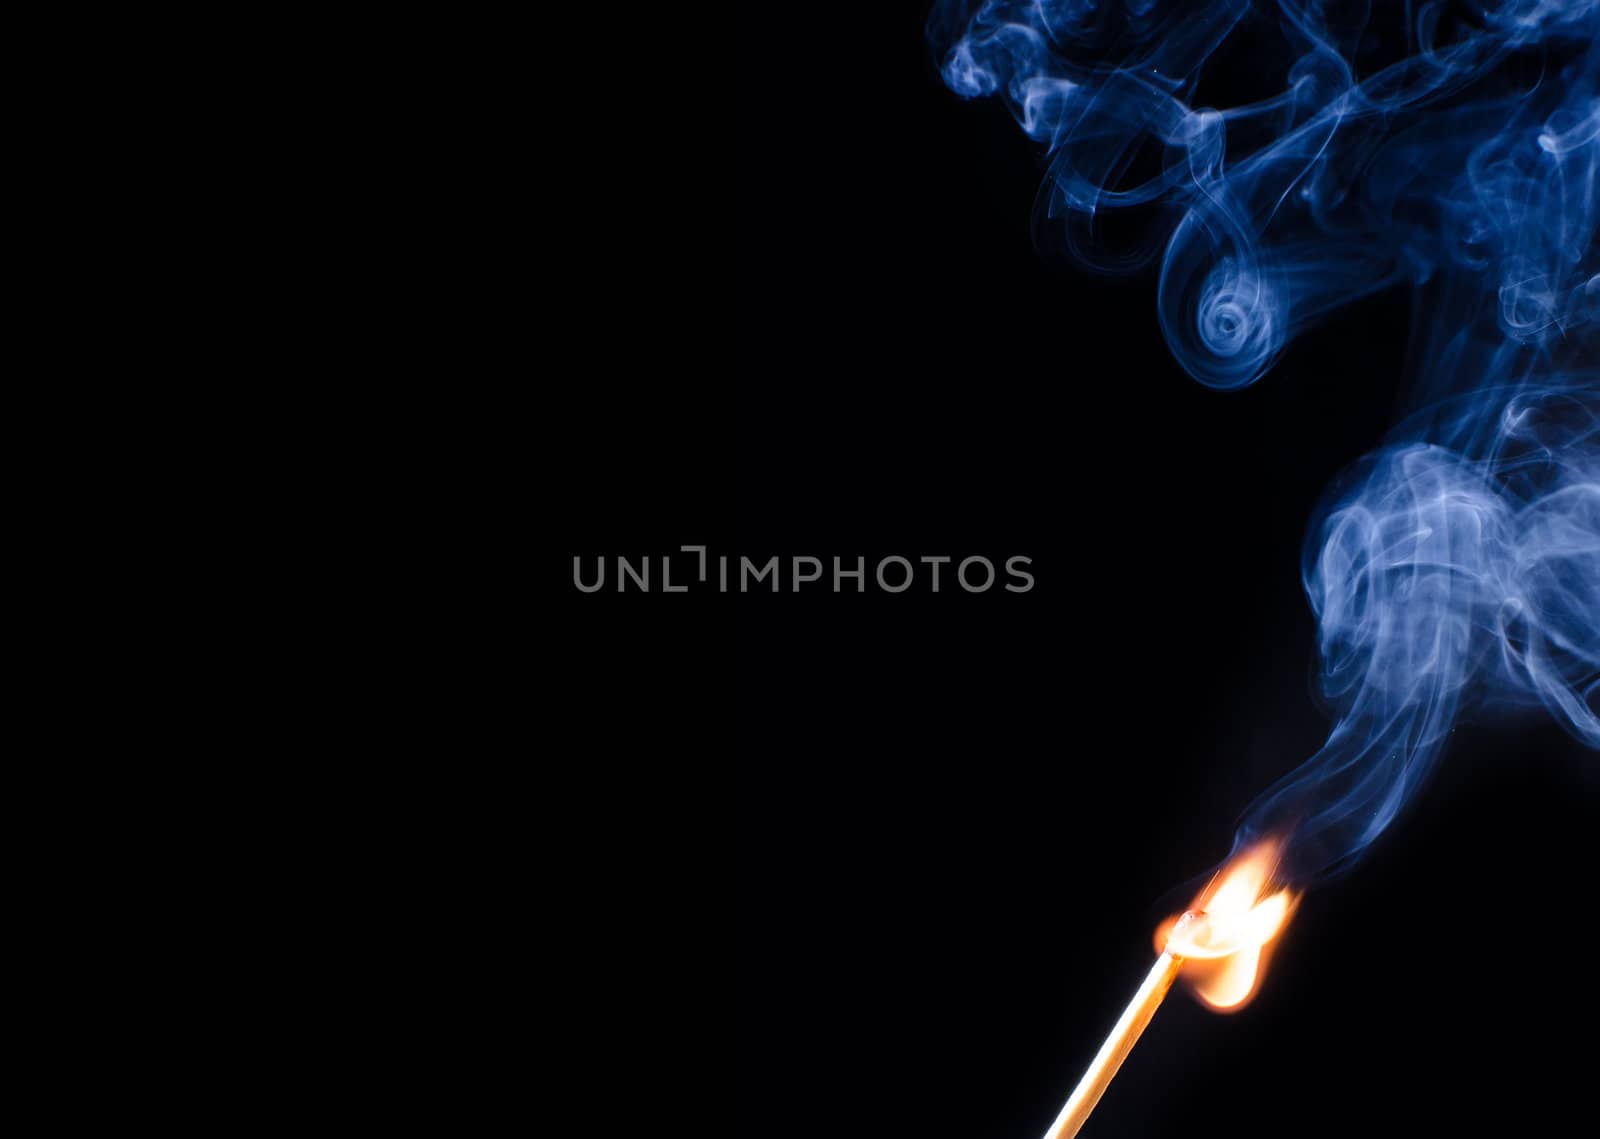 Match ignition with smoke over black background by dmitrimaruta